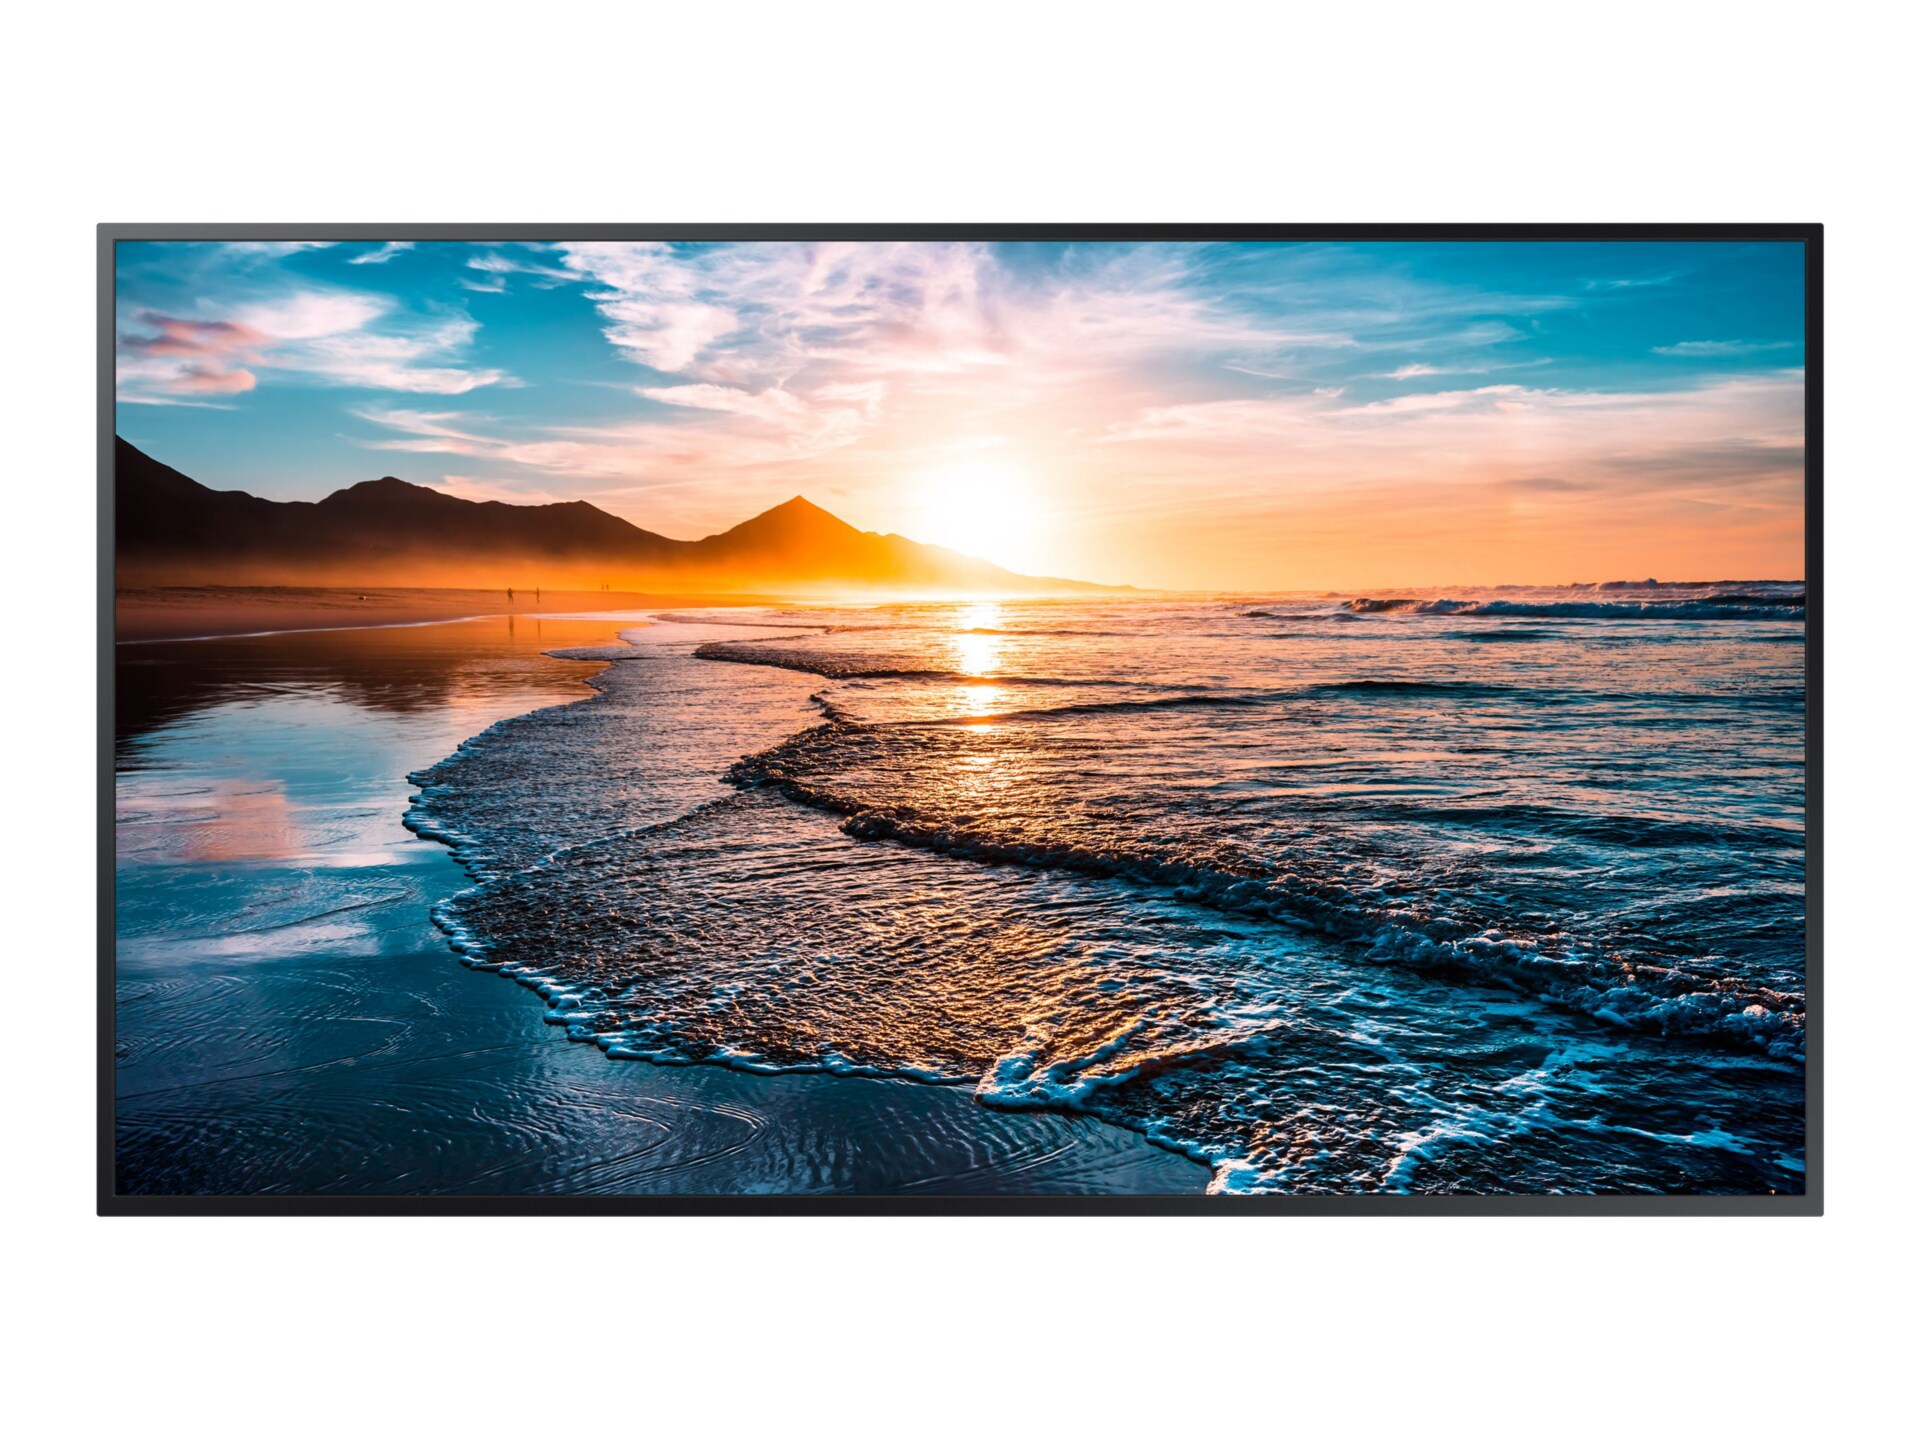 Samsung QH50R QHR Series - 50" Class (49.5" viewable) LED-backlit LCD display - 4K - for digital signage